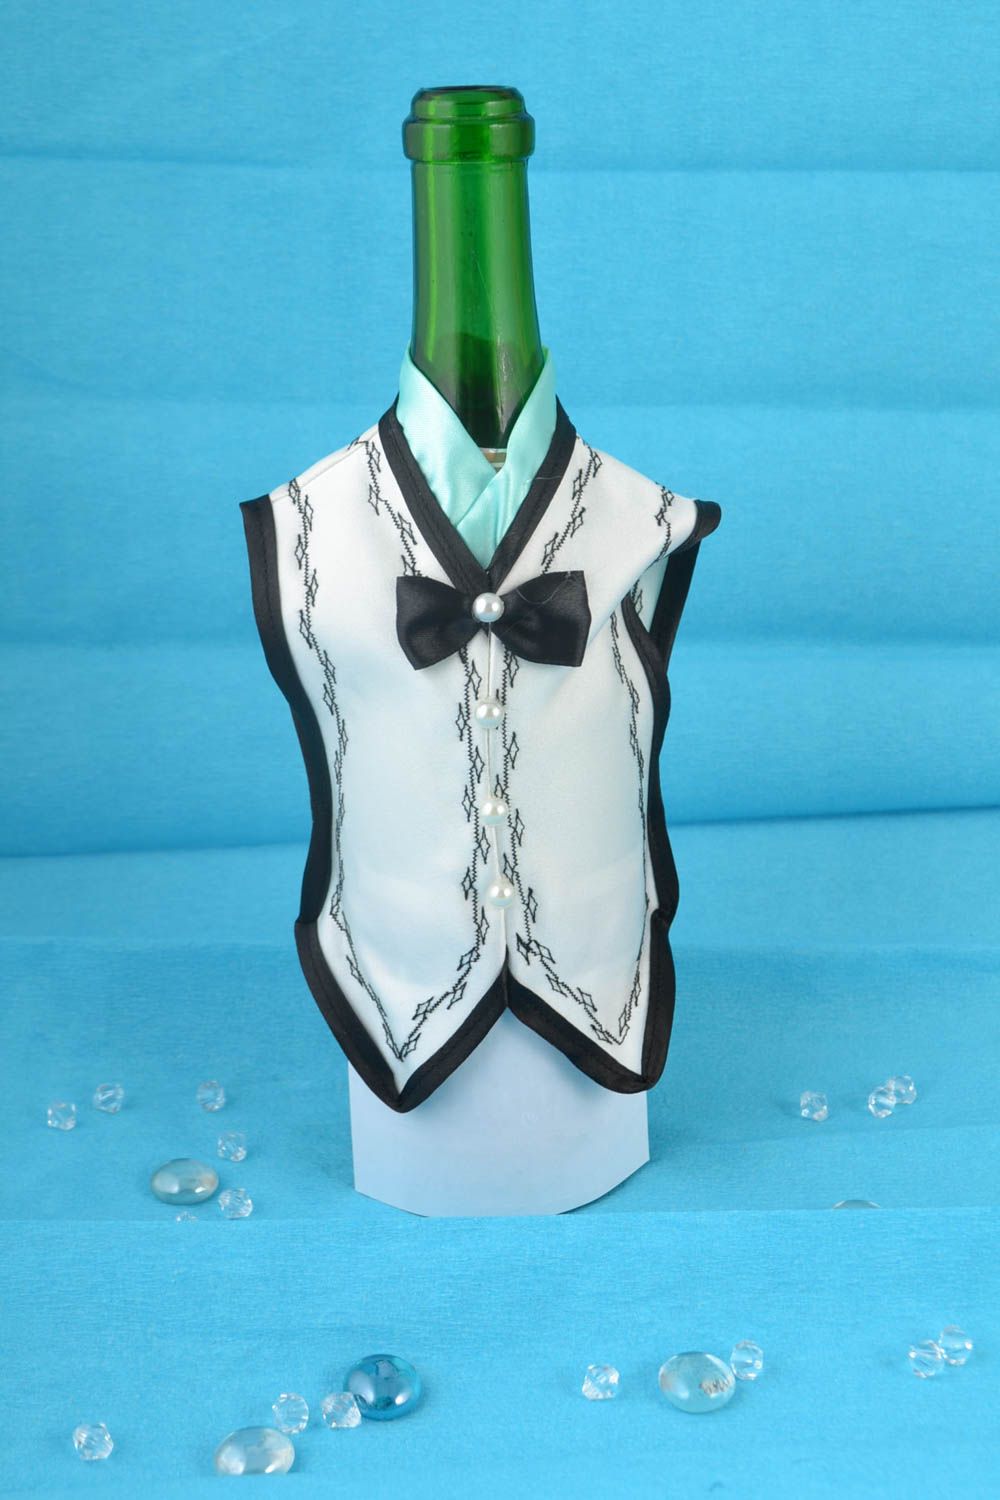 Designer stylish handmade unusual clothes of groom for champagne bottle photo 1